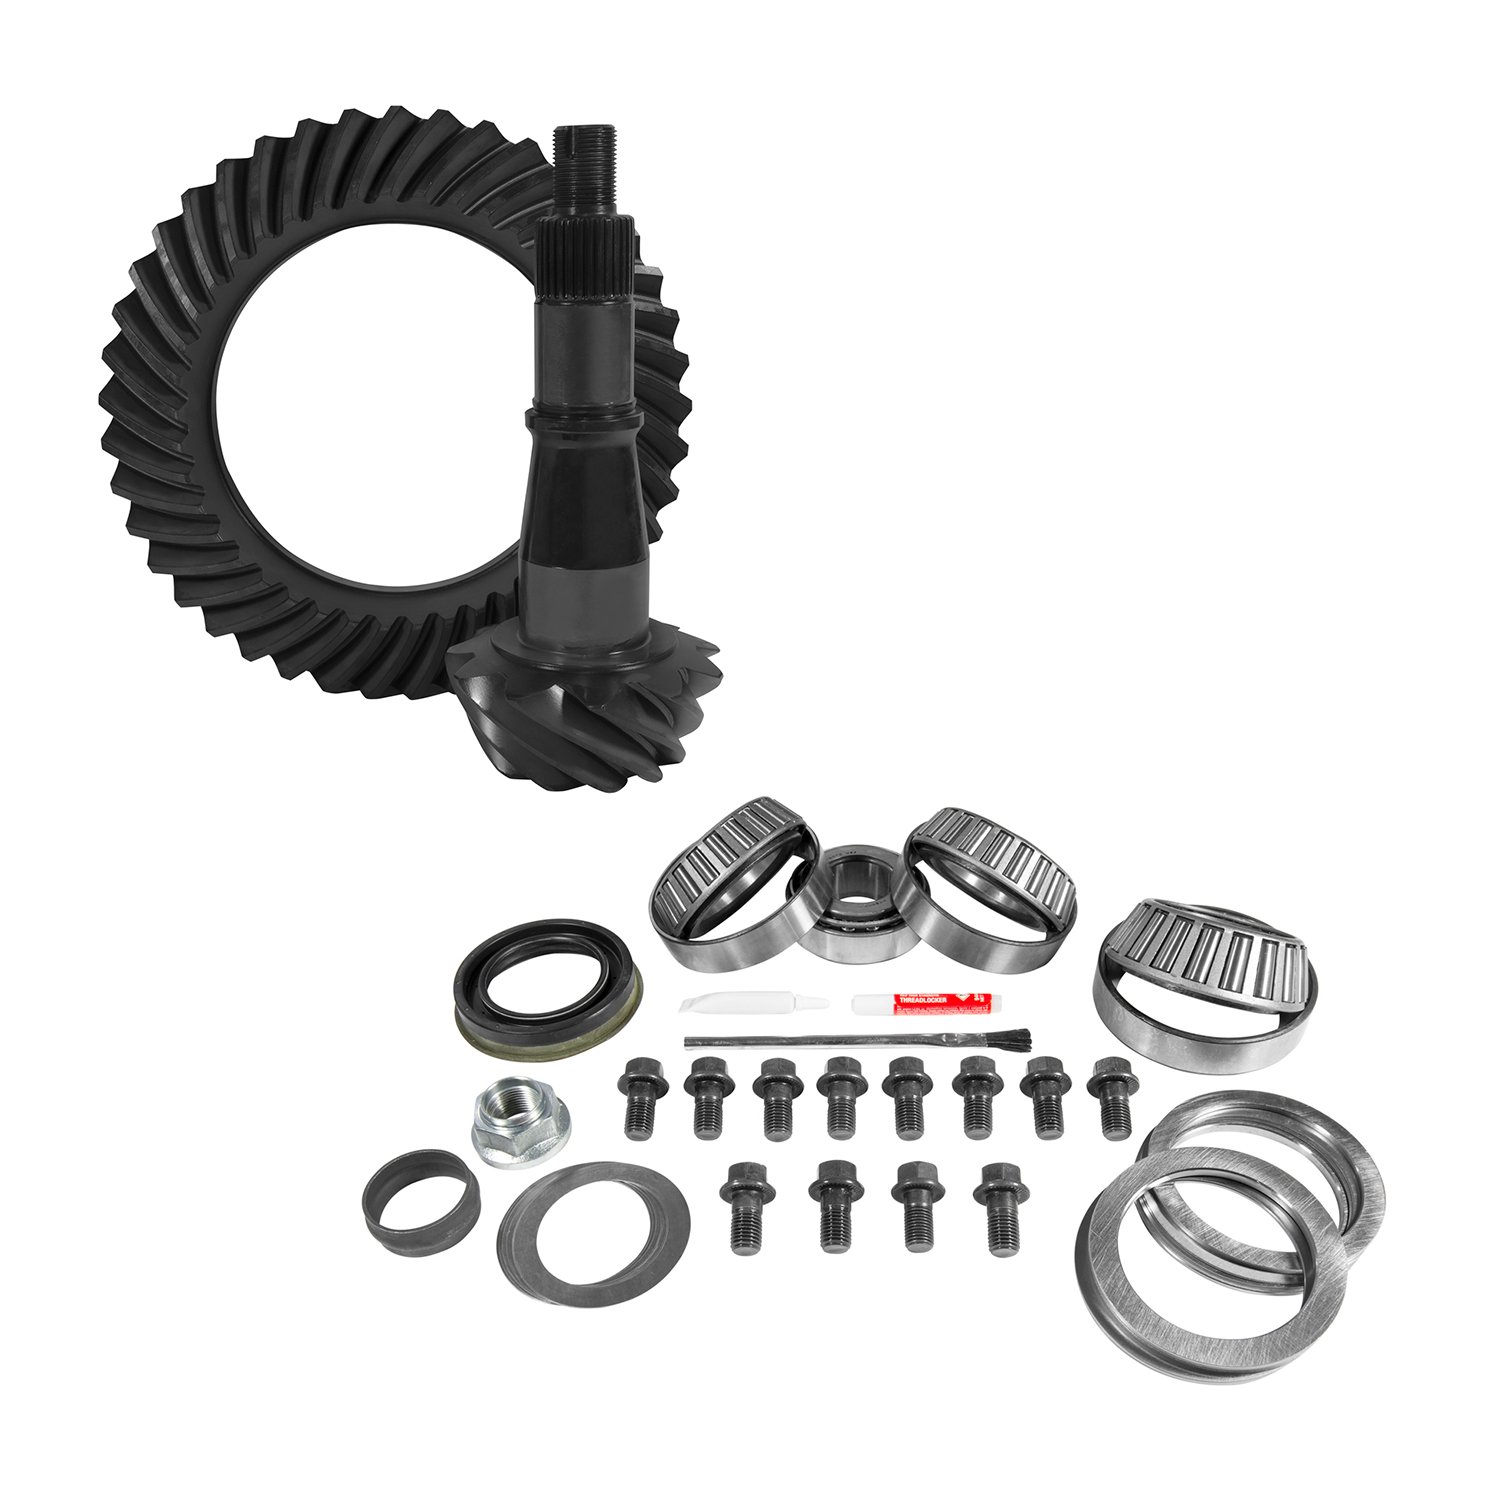 USA Standard 10704 9.5 in. GM 3.73 Rear Ring & Pinion Install Kit, Axle Bearings & Seals